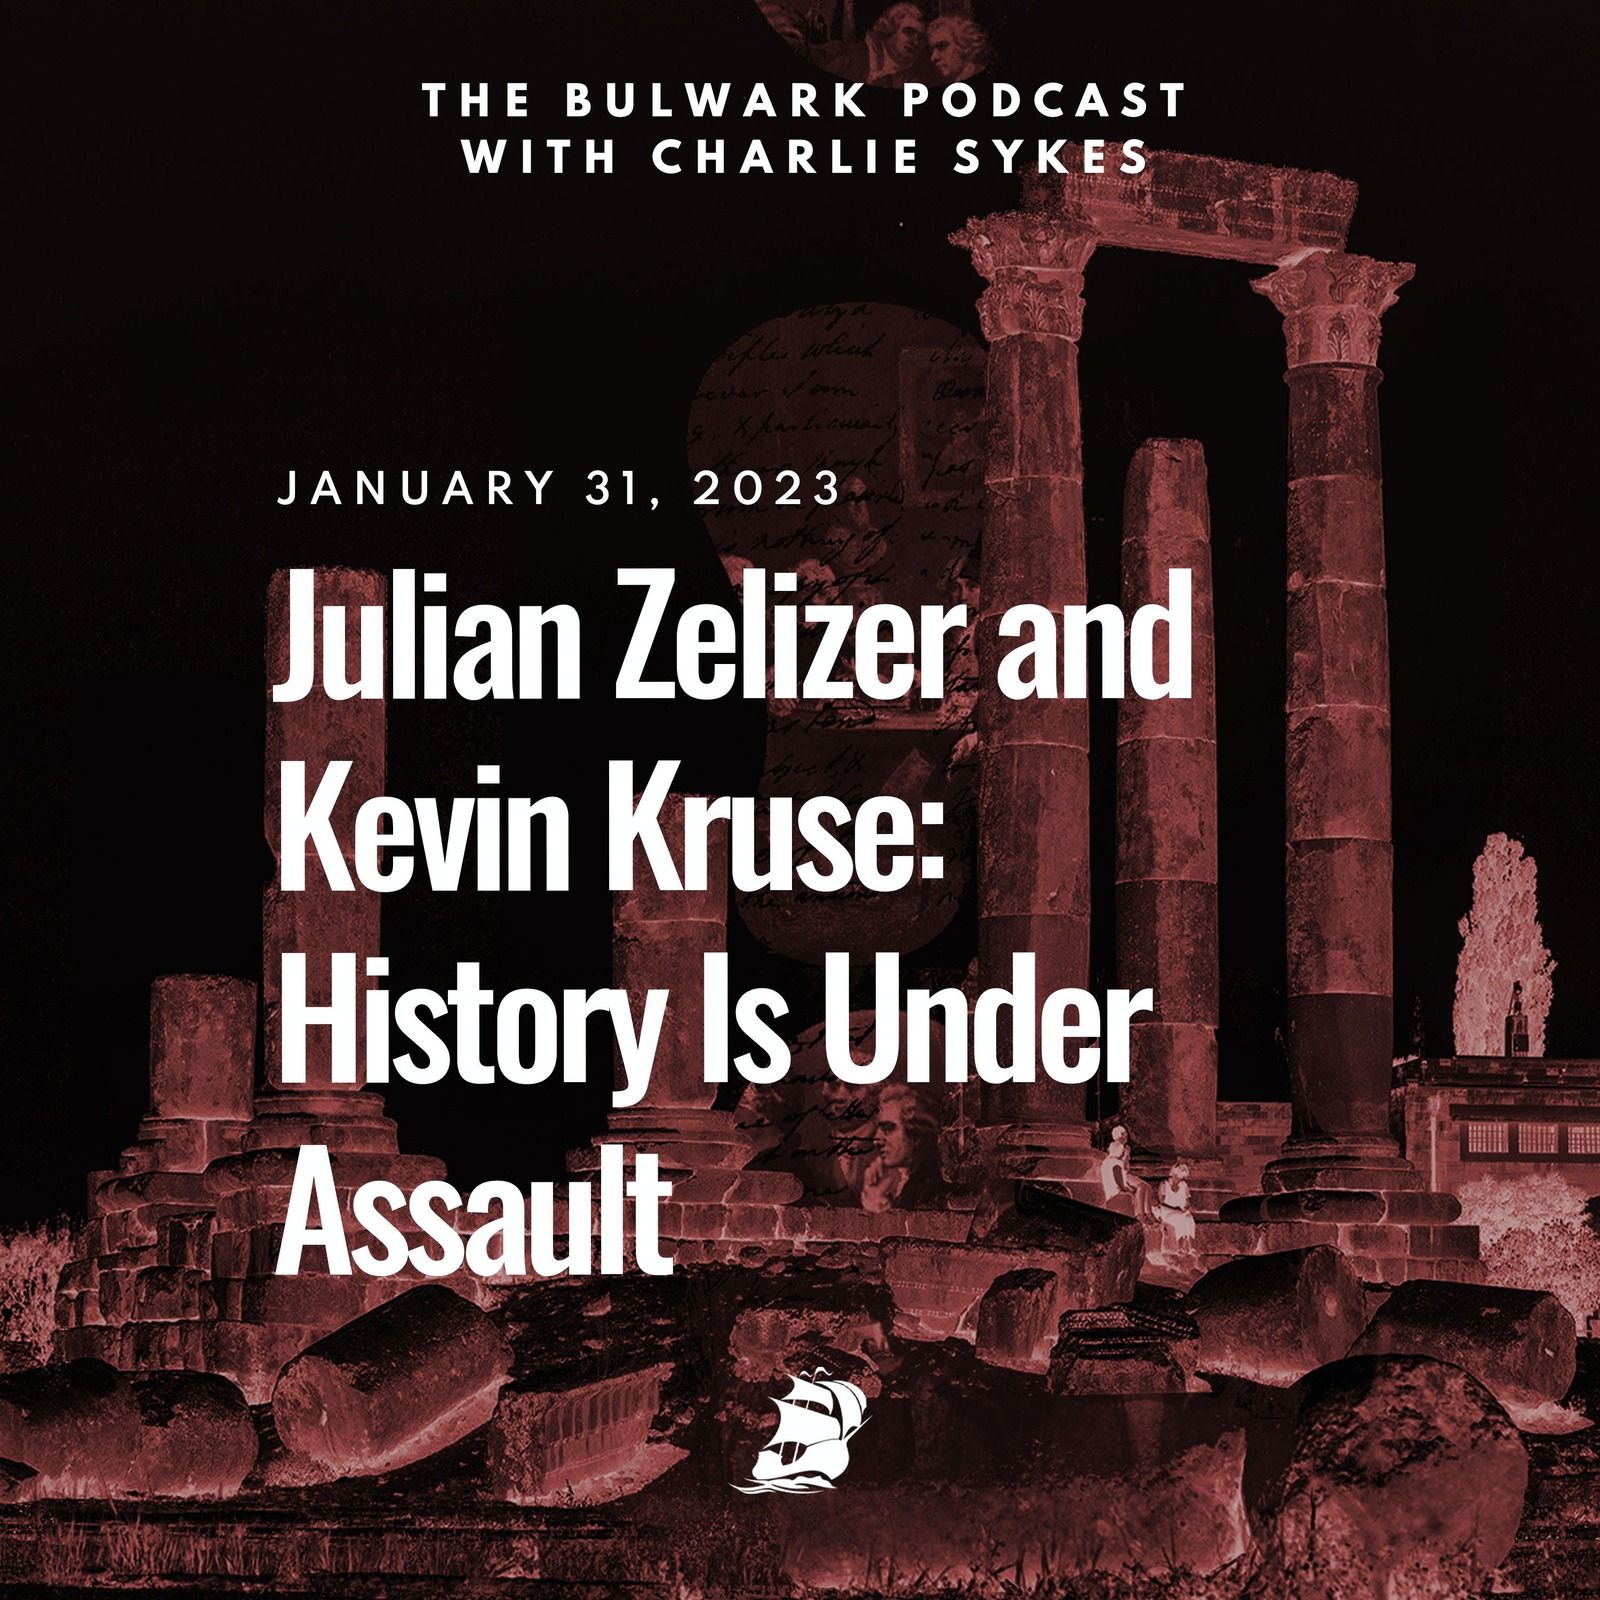 Julian Zelizer and Kevin Kruse: History Is Under Assault by The Bulwark Podcast